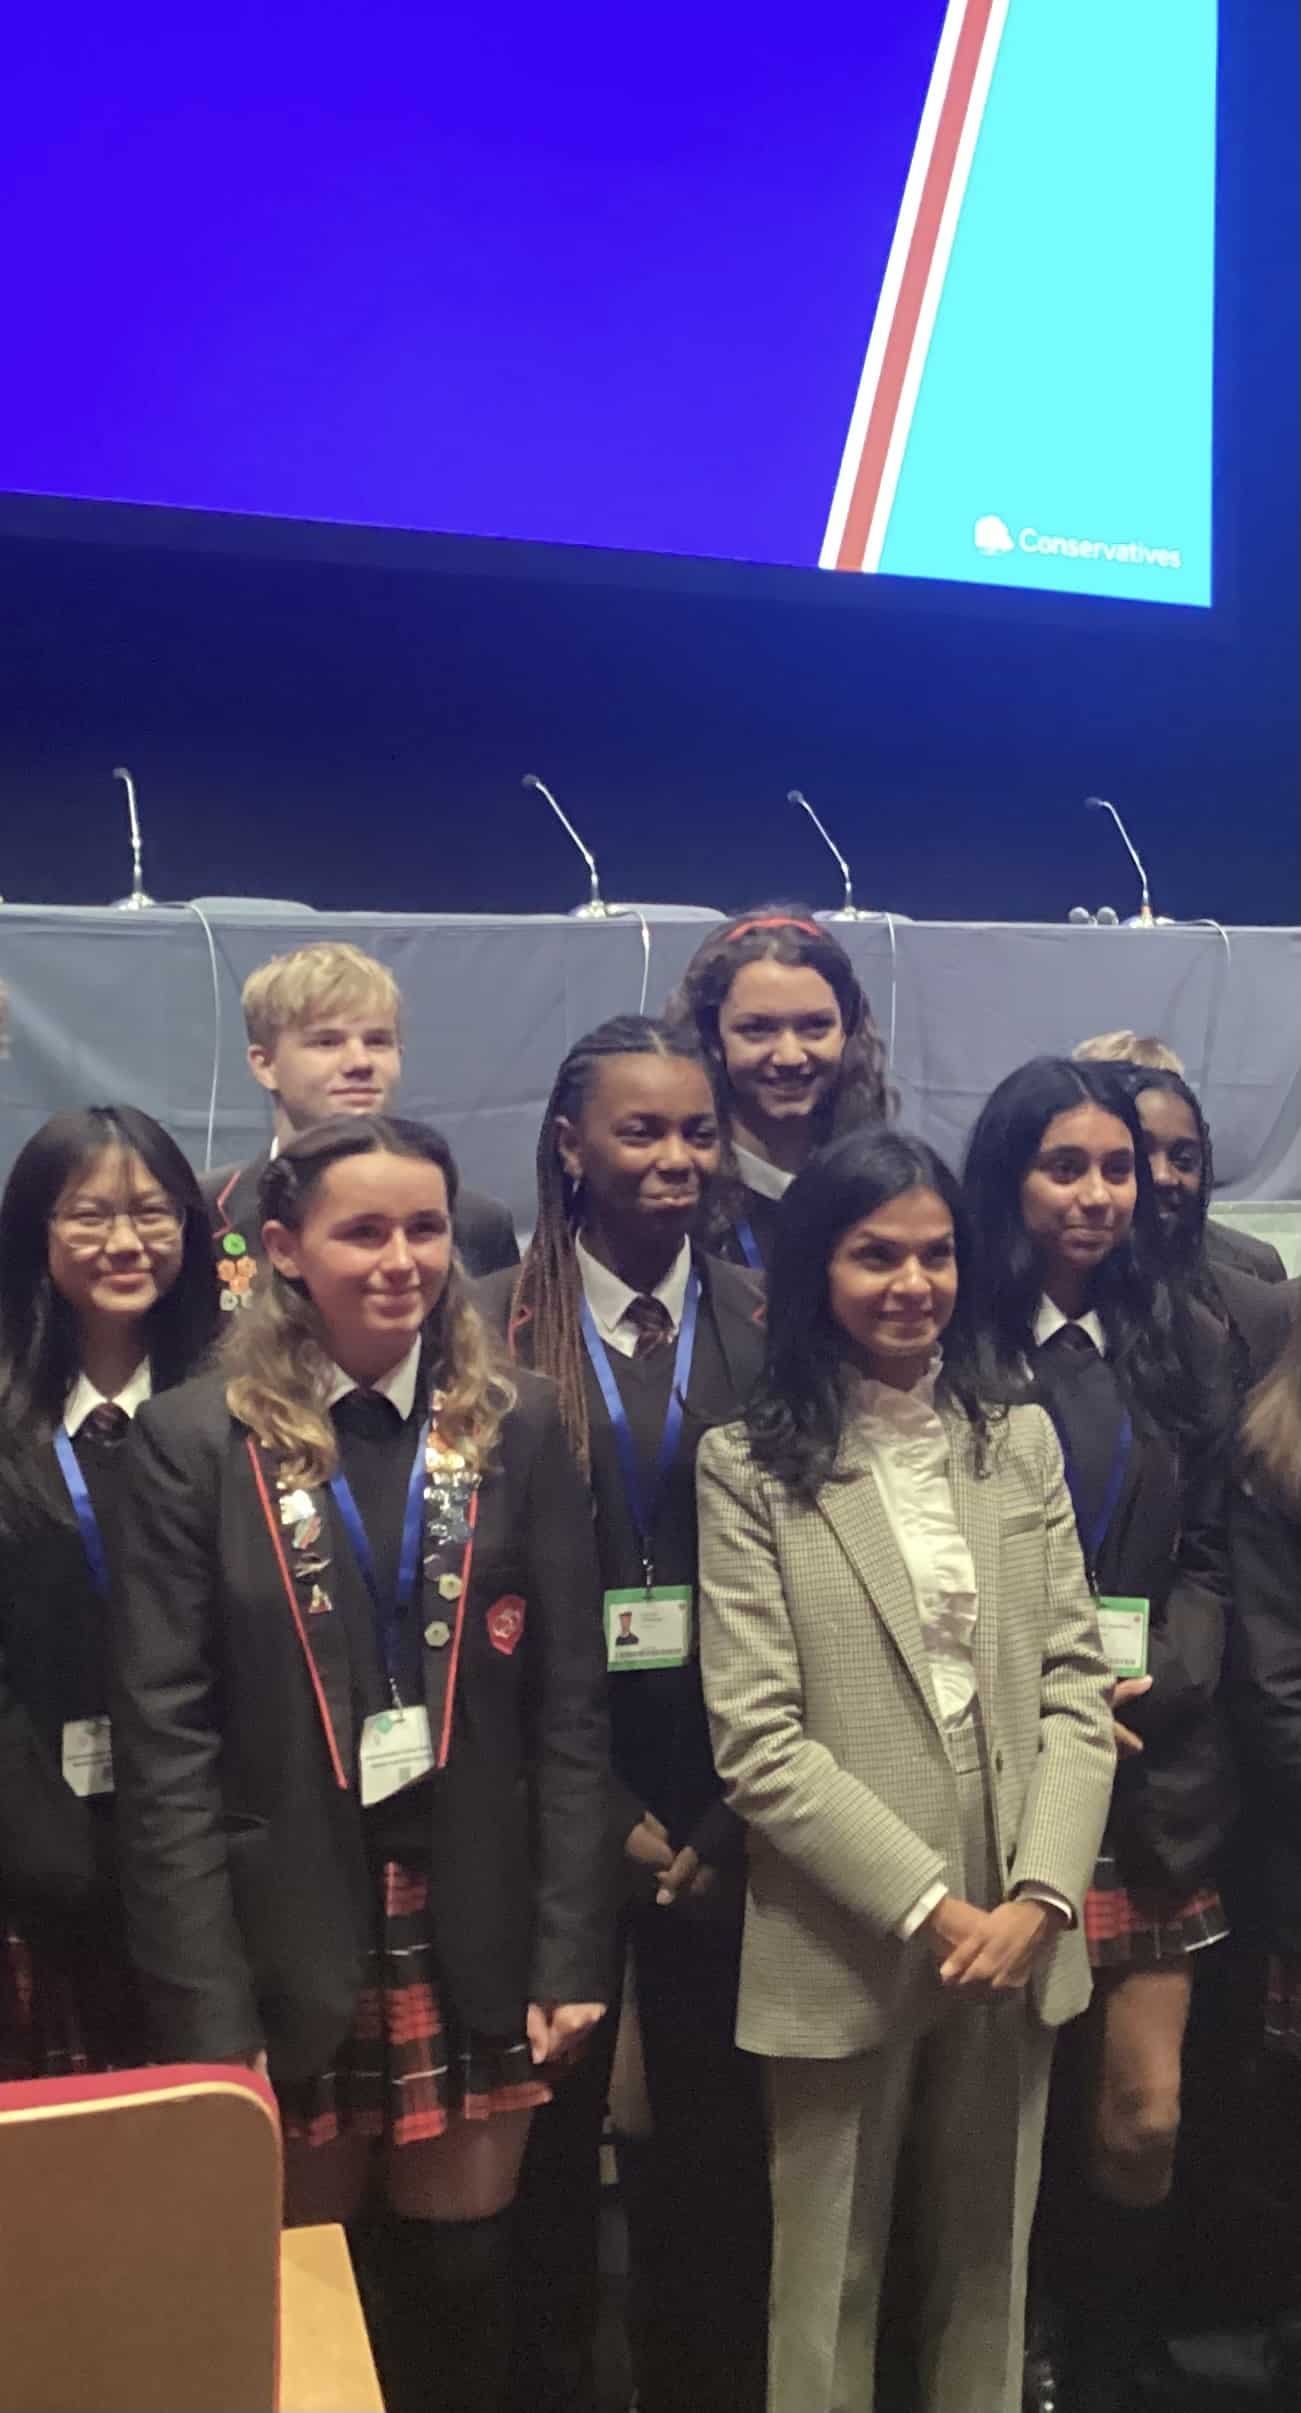 Students from Didsbury High School pictured with Akshata Murty at the Conservative Party Conference 2023.